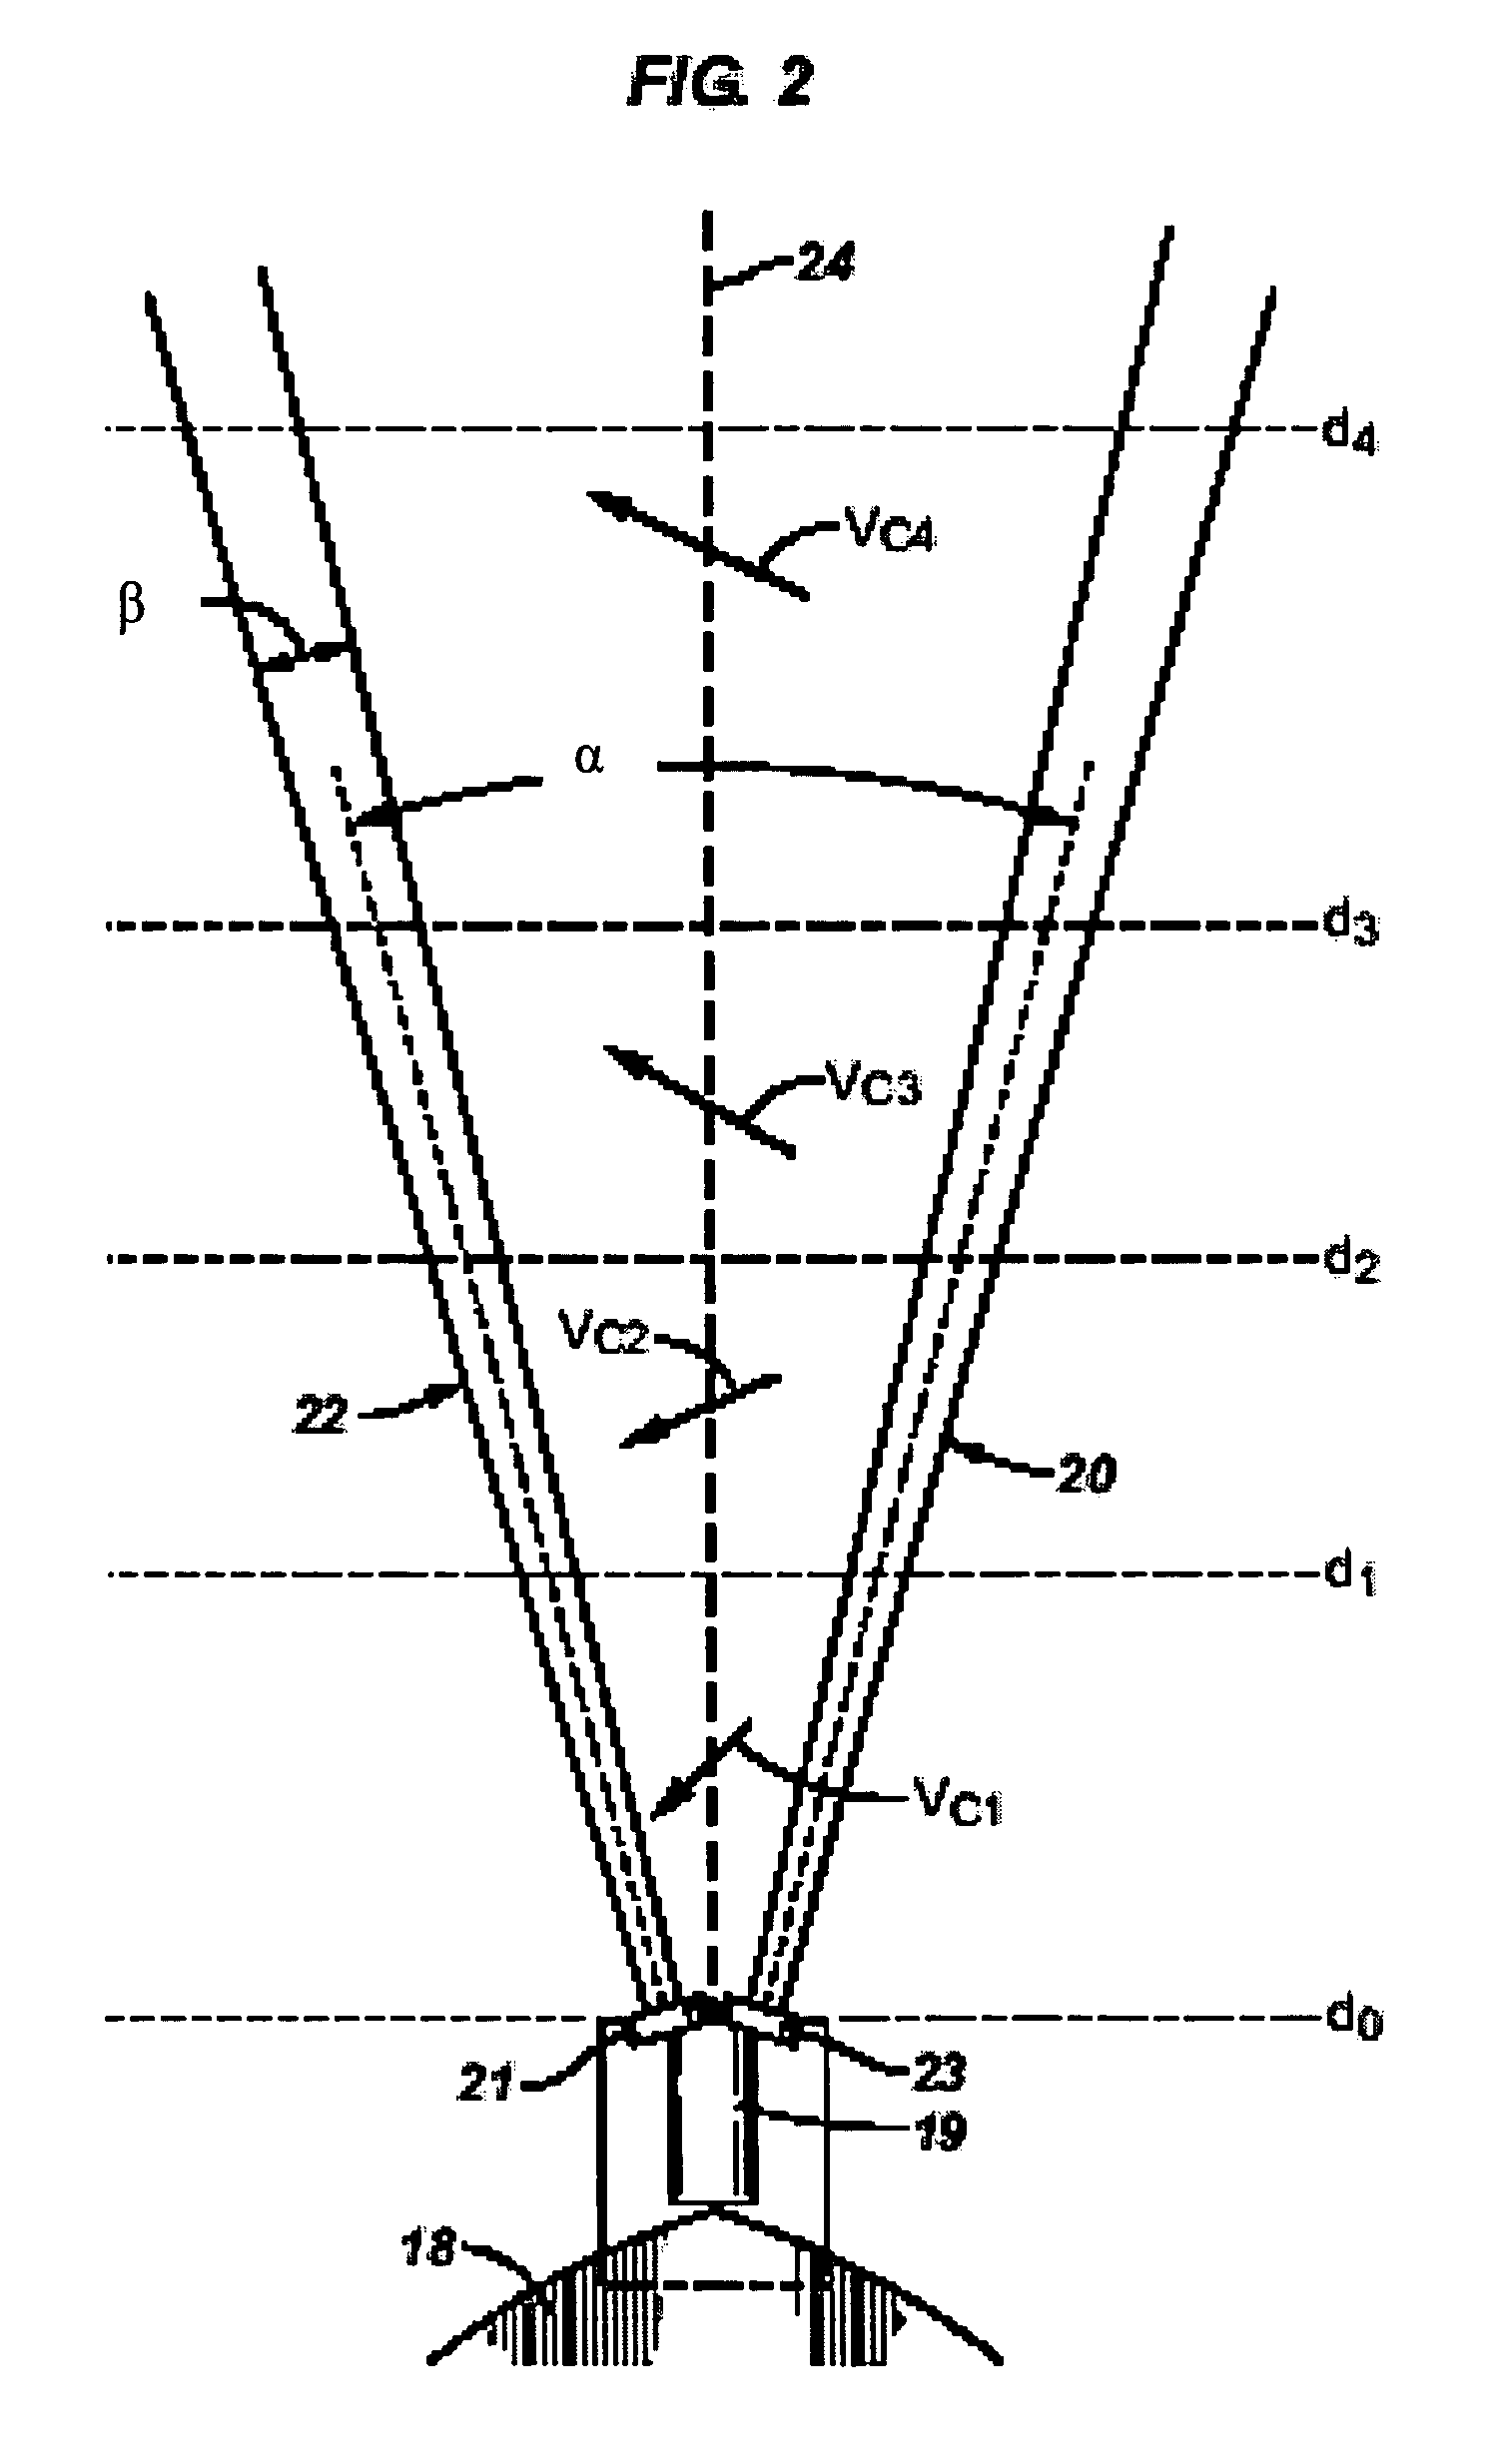 Forward looking systems and methods for positioning marine seismic equipment